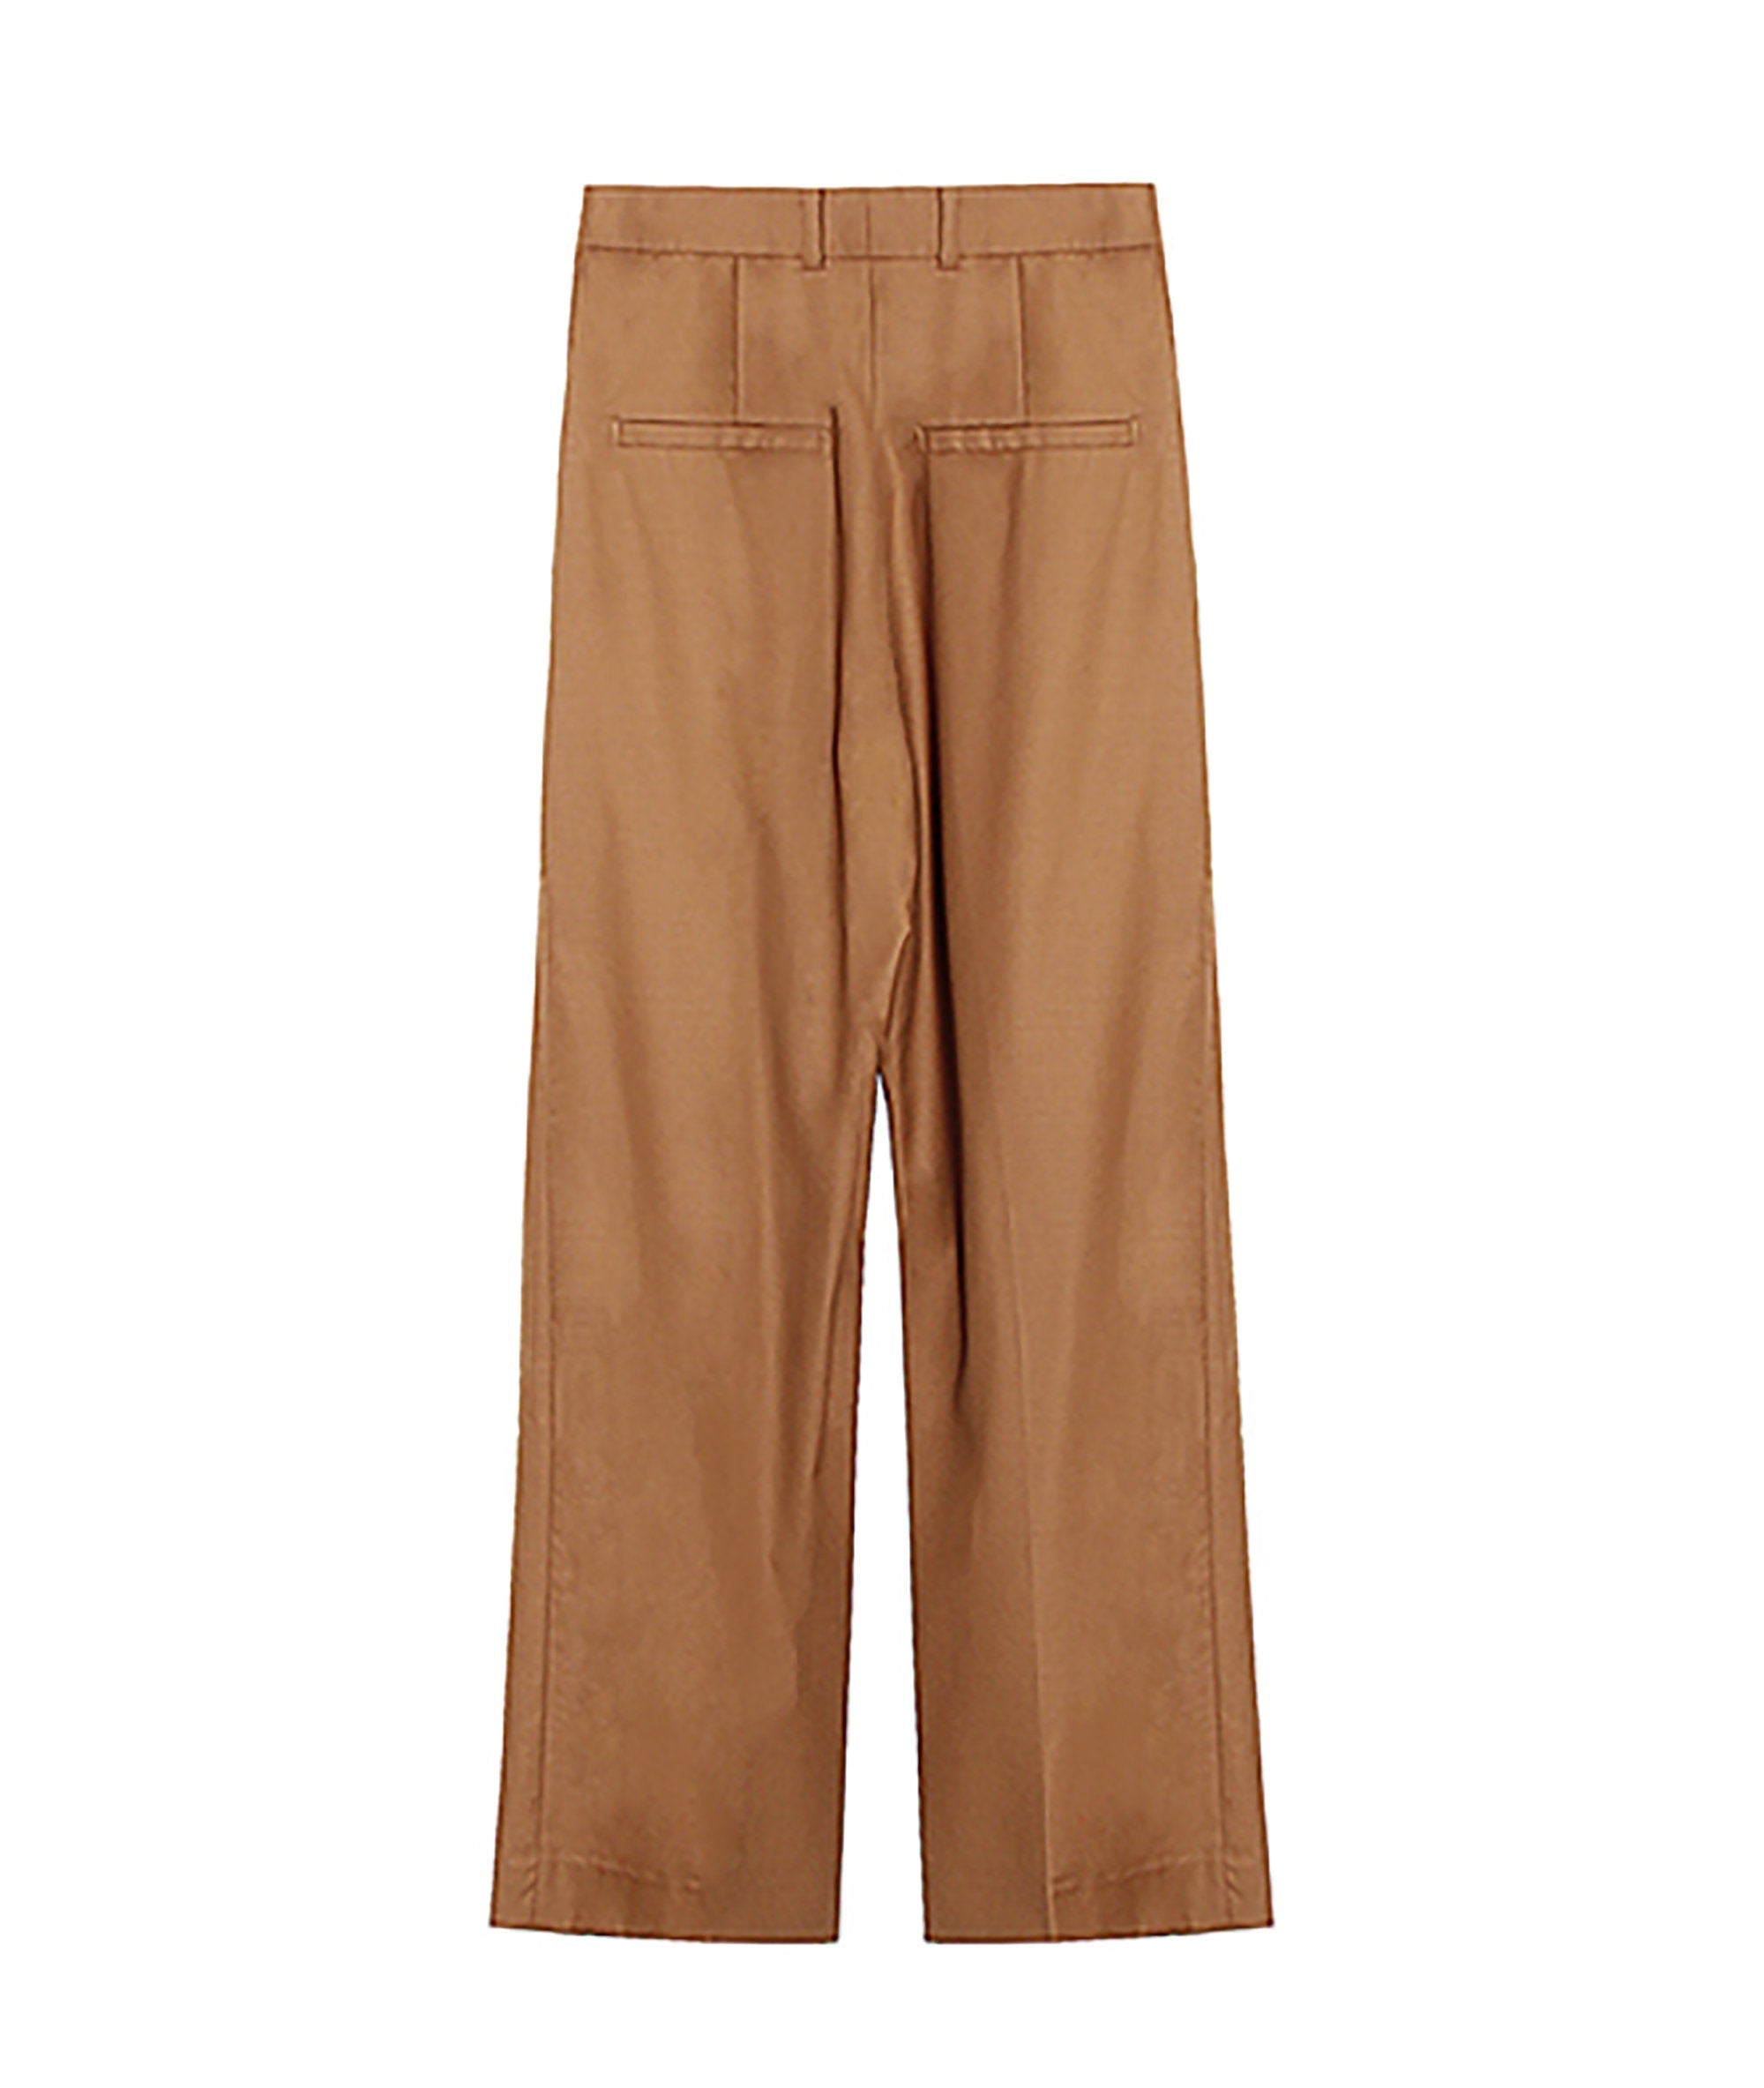 womens brown trousers